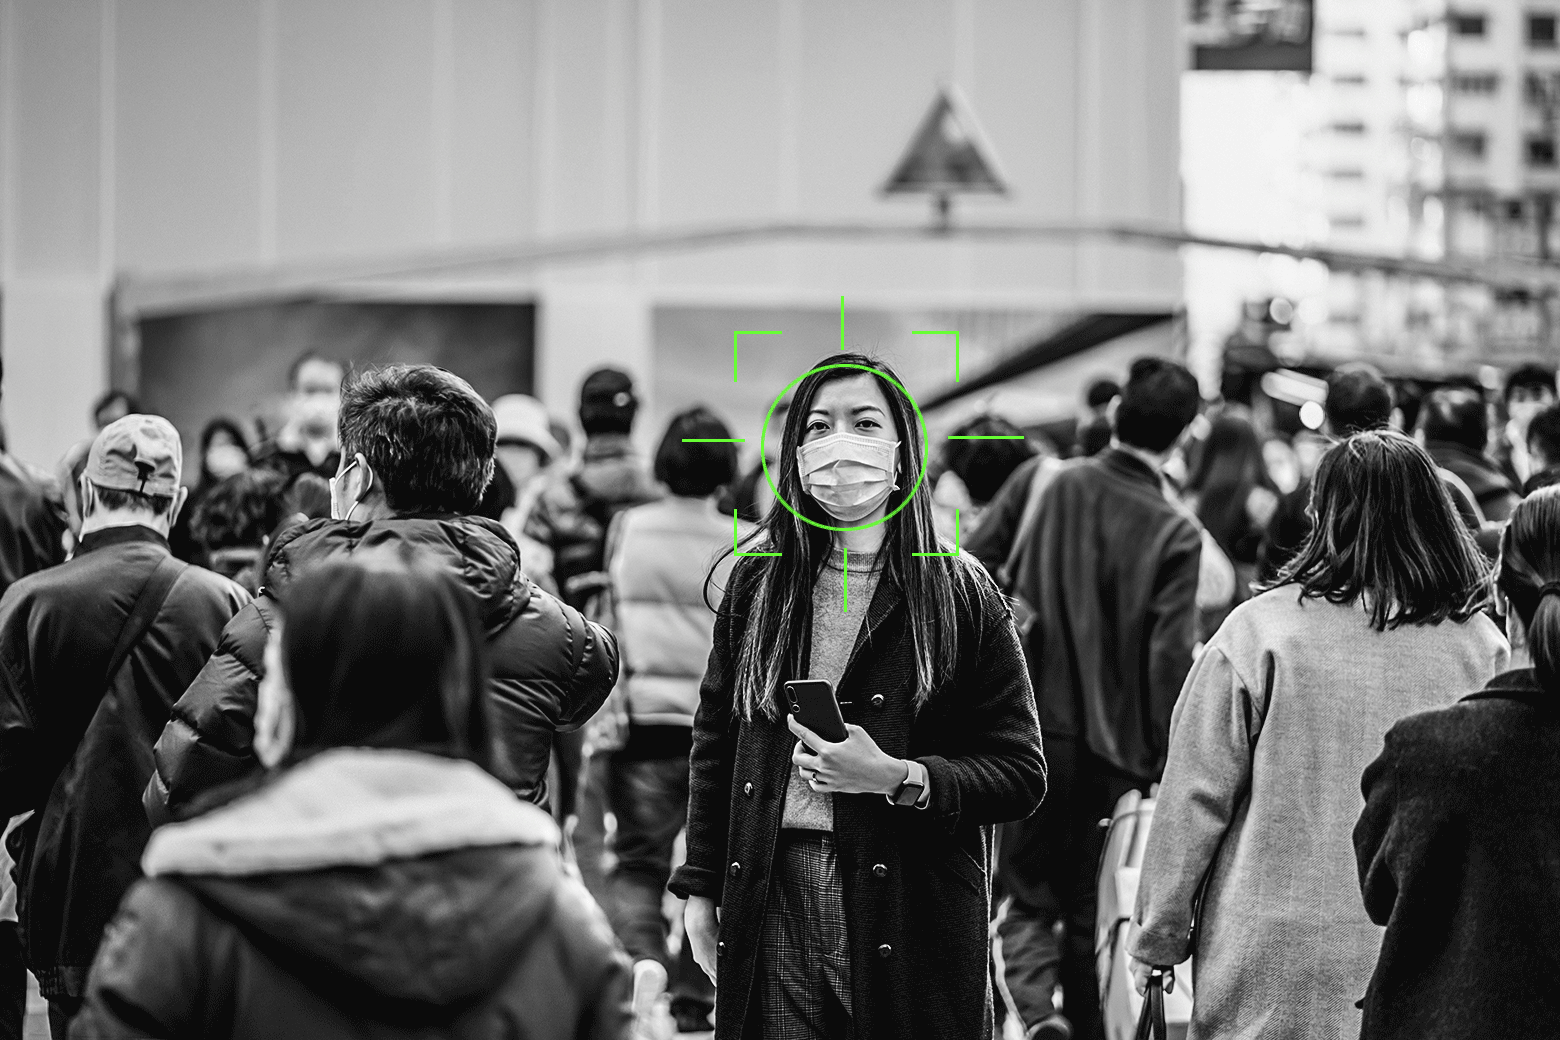 An animation of facial recognition marks zeroing in on a woman in a crowd and then linking to a mouth talking, floating above her